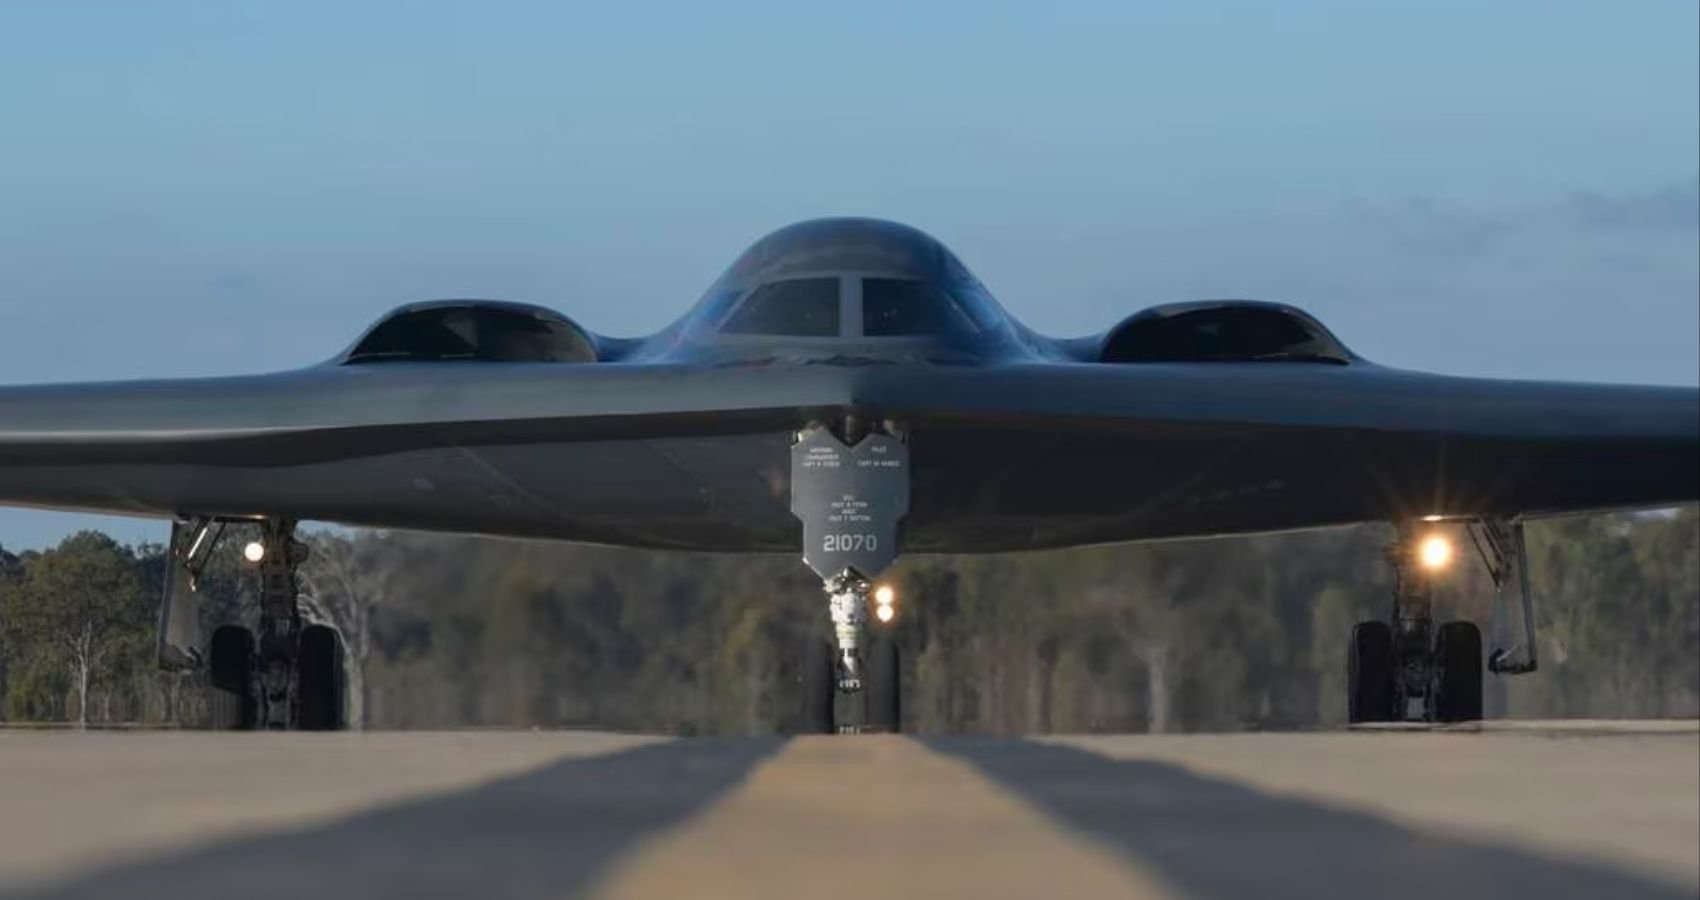 Why America Wasted $15 Billion On The B-2 Spirit Stealth Bomber